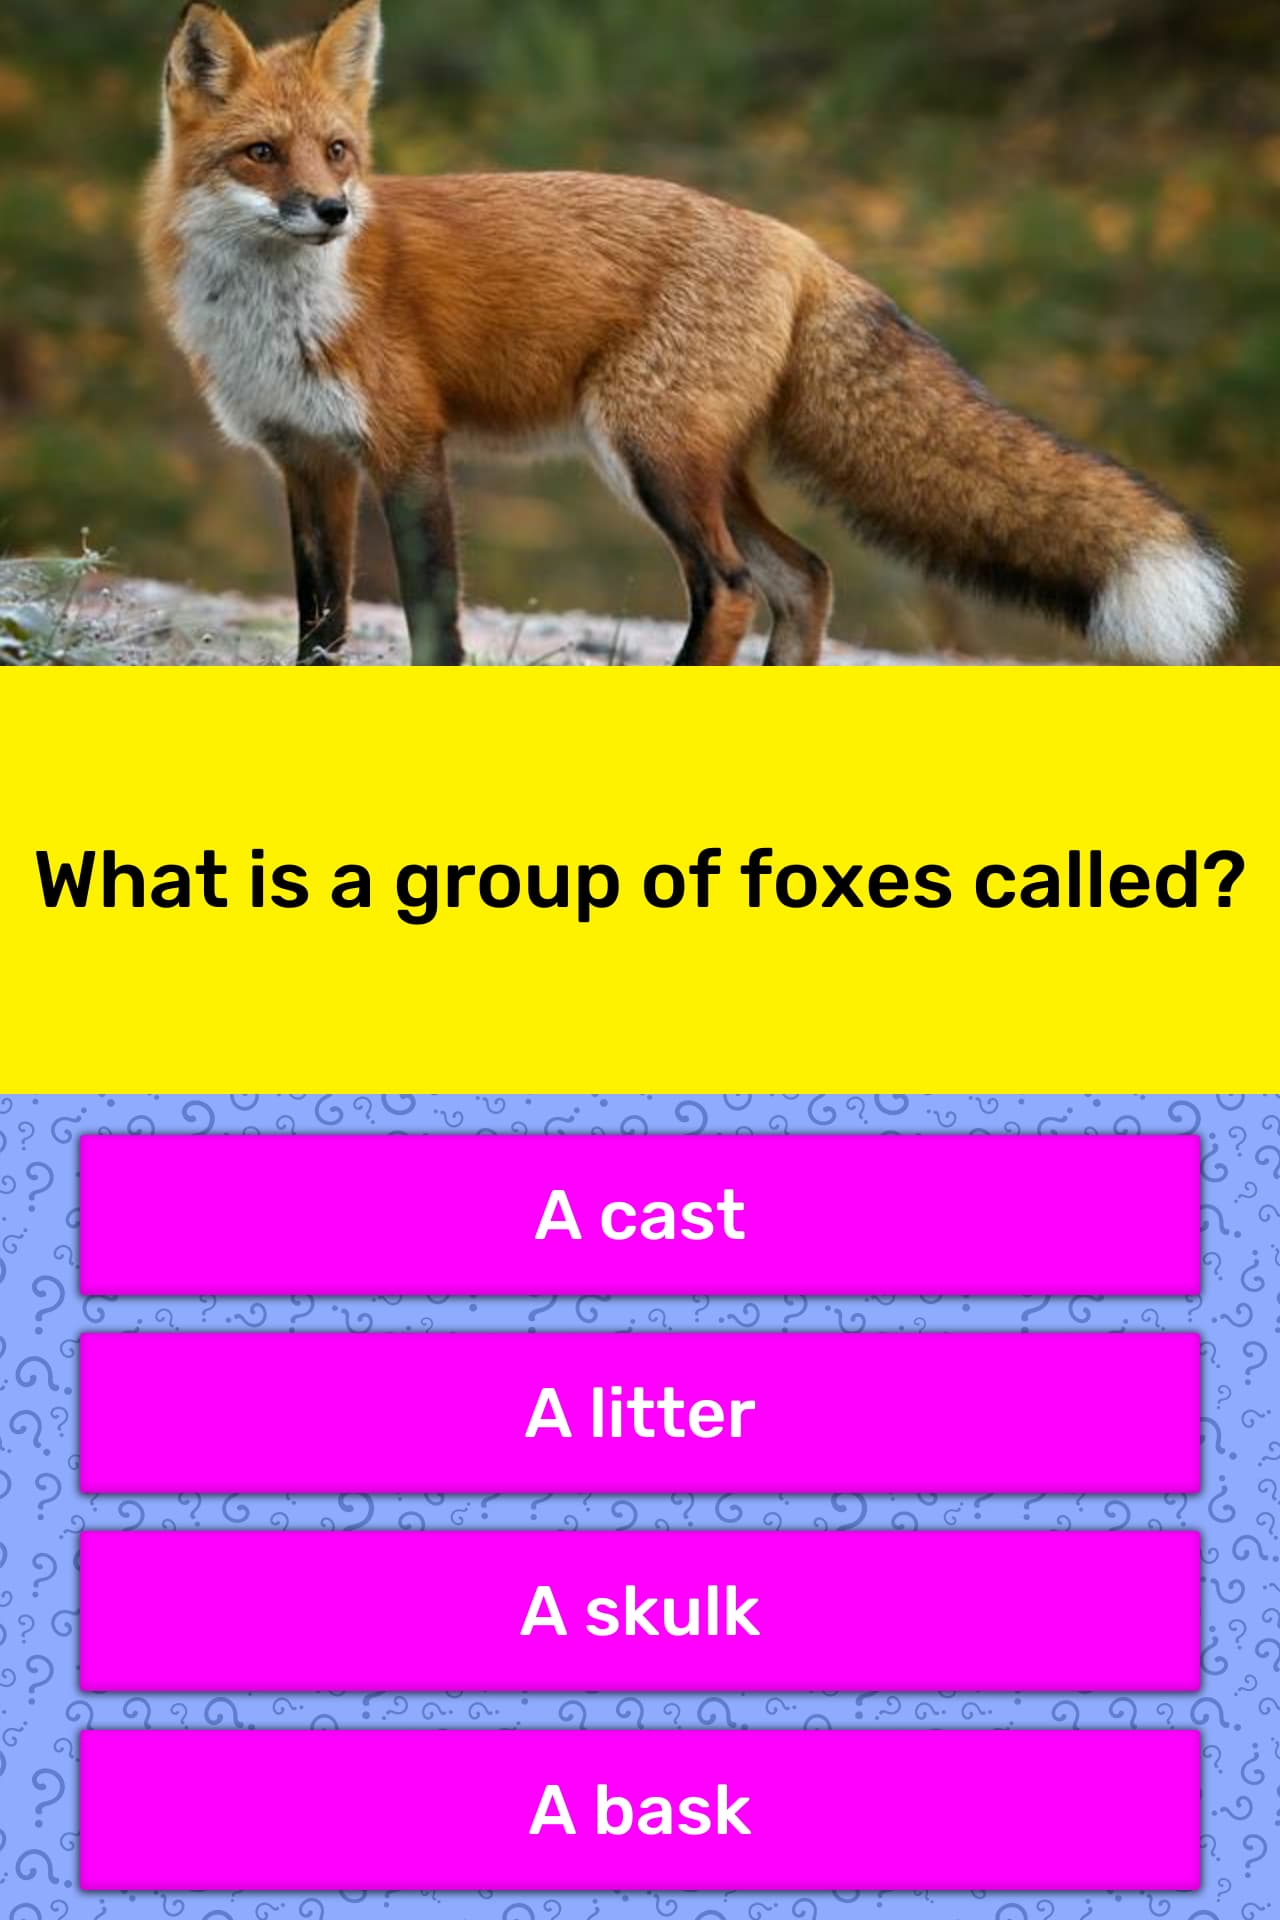 What are a pack of foxes called?